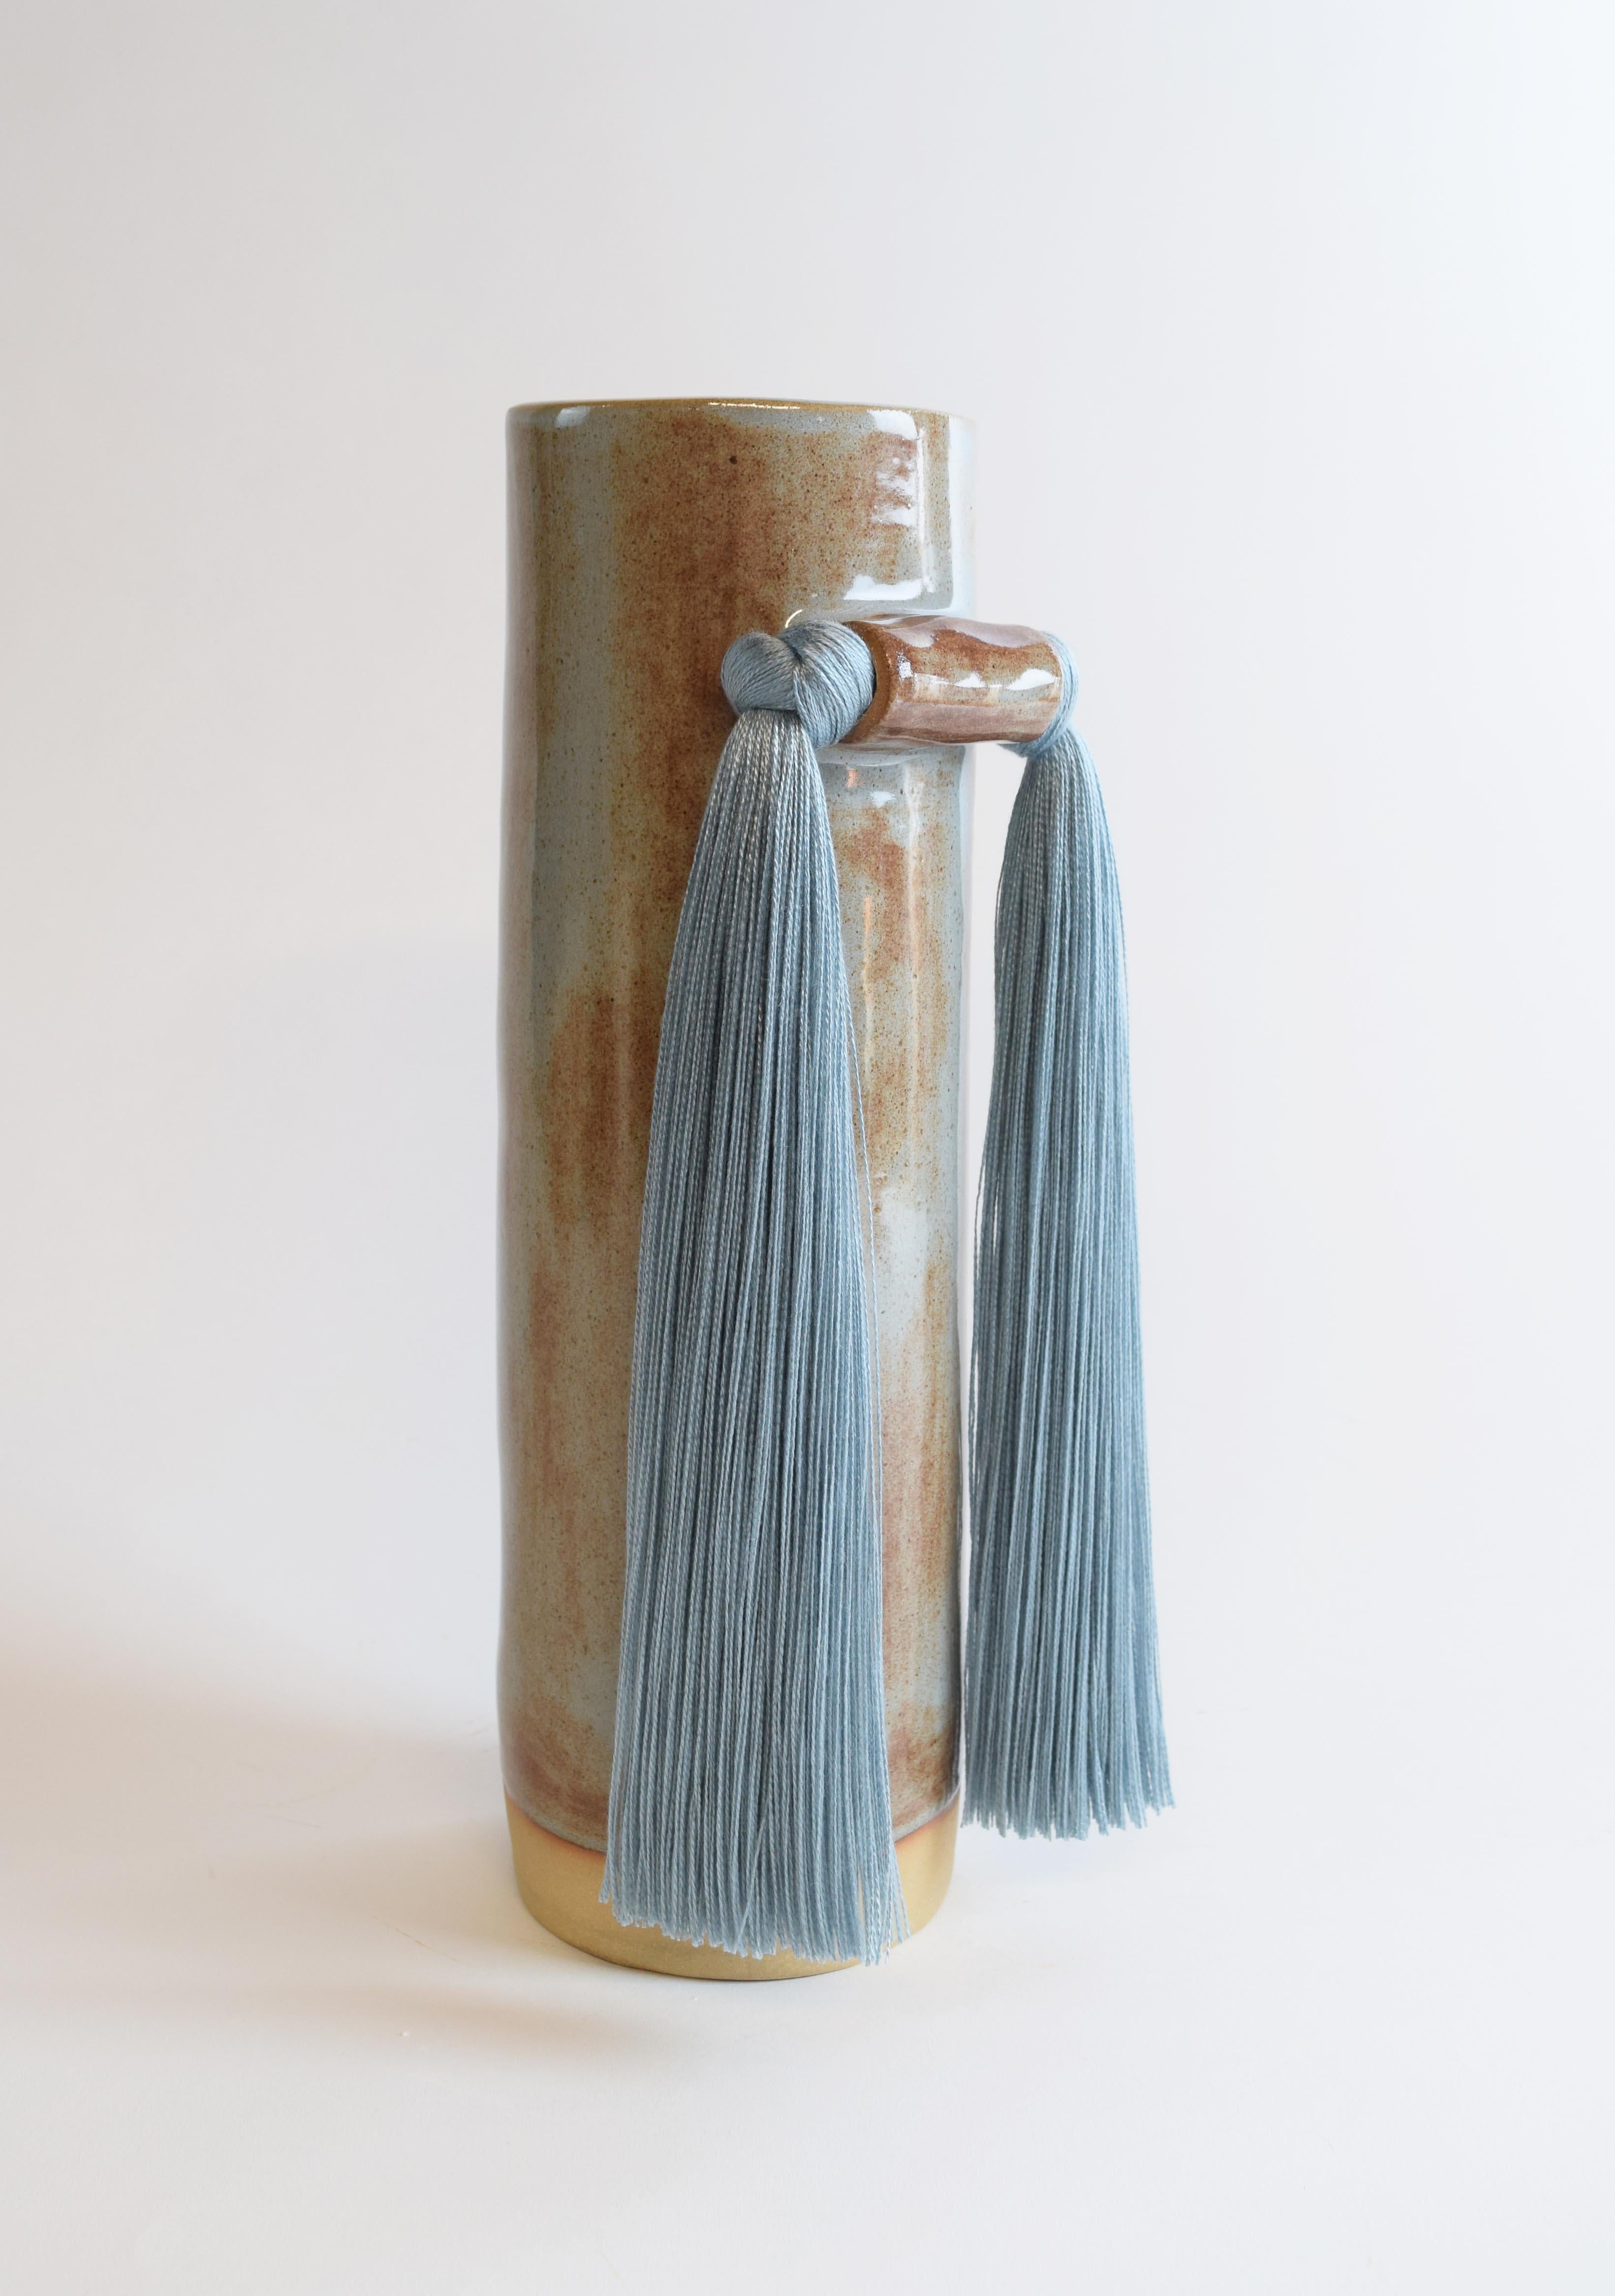 Vase #531 by Karen Gayle Tinney

Quiet symmetry and front-facing fringe details make this vase perfect for display on a shelf or table.

Hand formed beige stoneware with blue shino glaze. Blue tencel fringe detail. Inside is glazed white, vessel